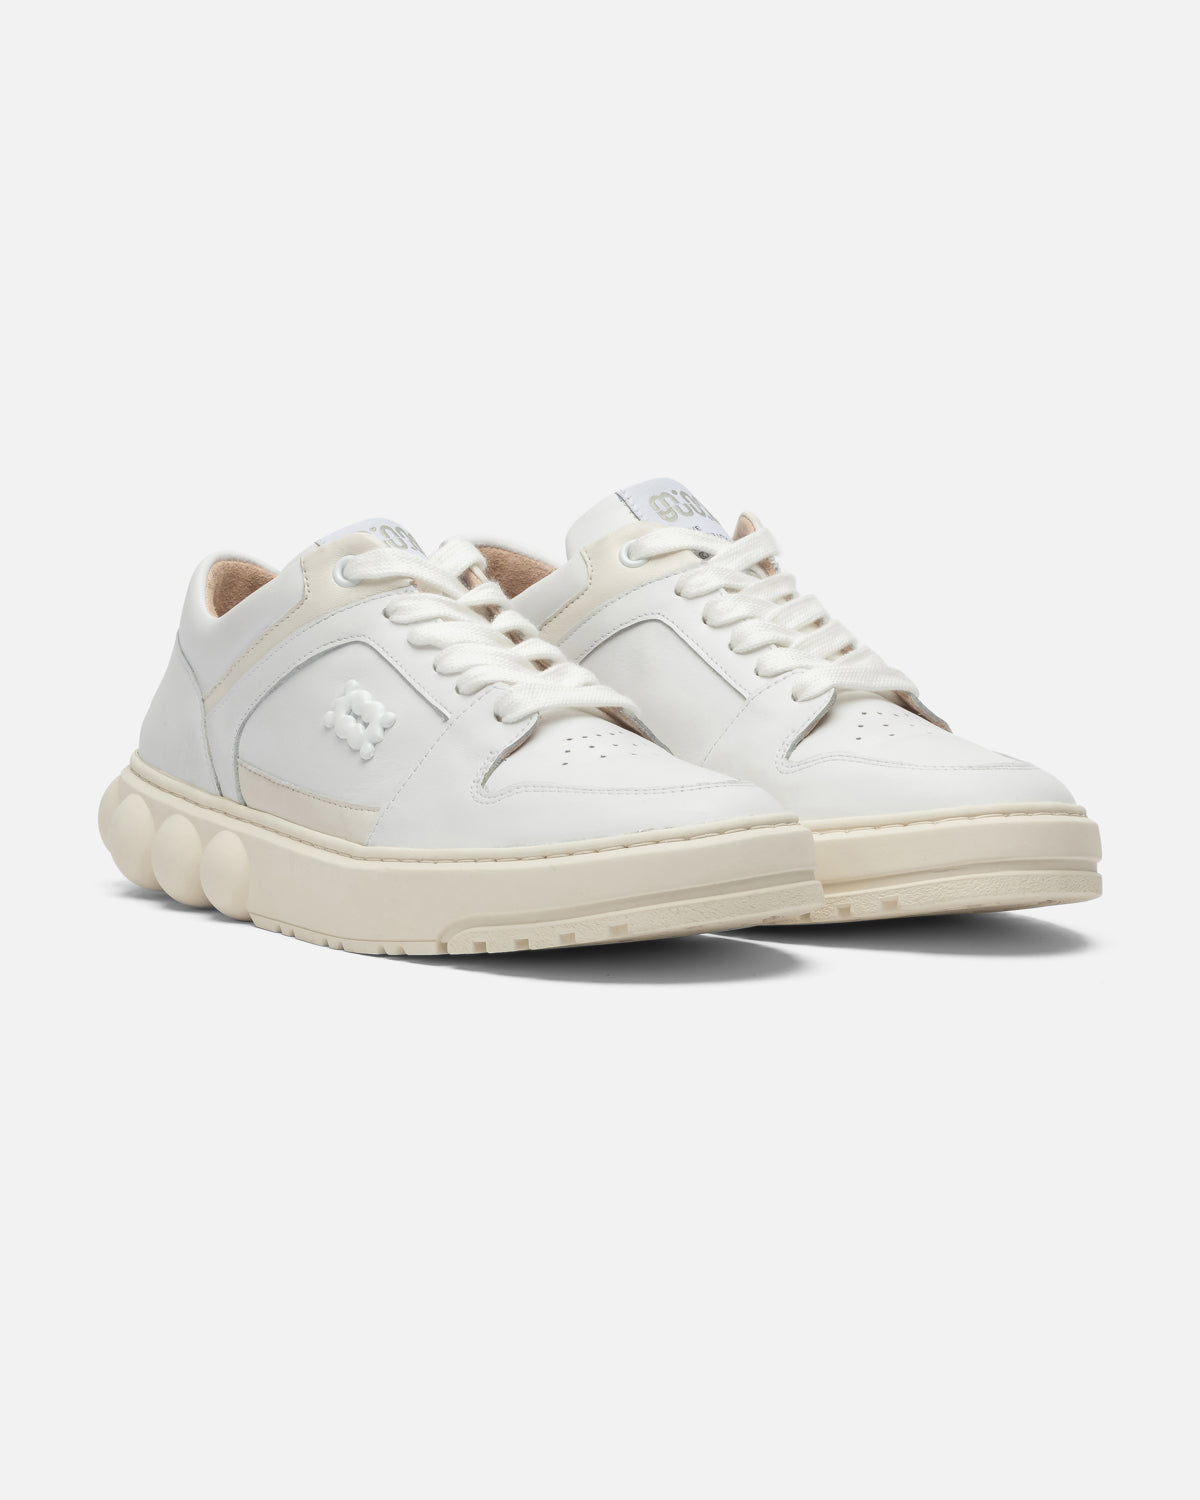 Oyster Nude/White Leather